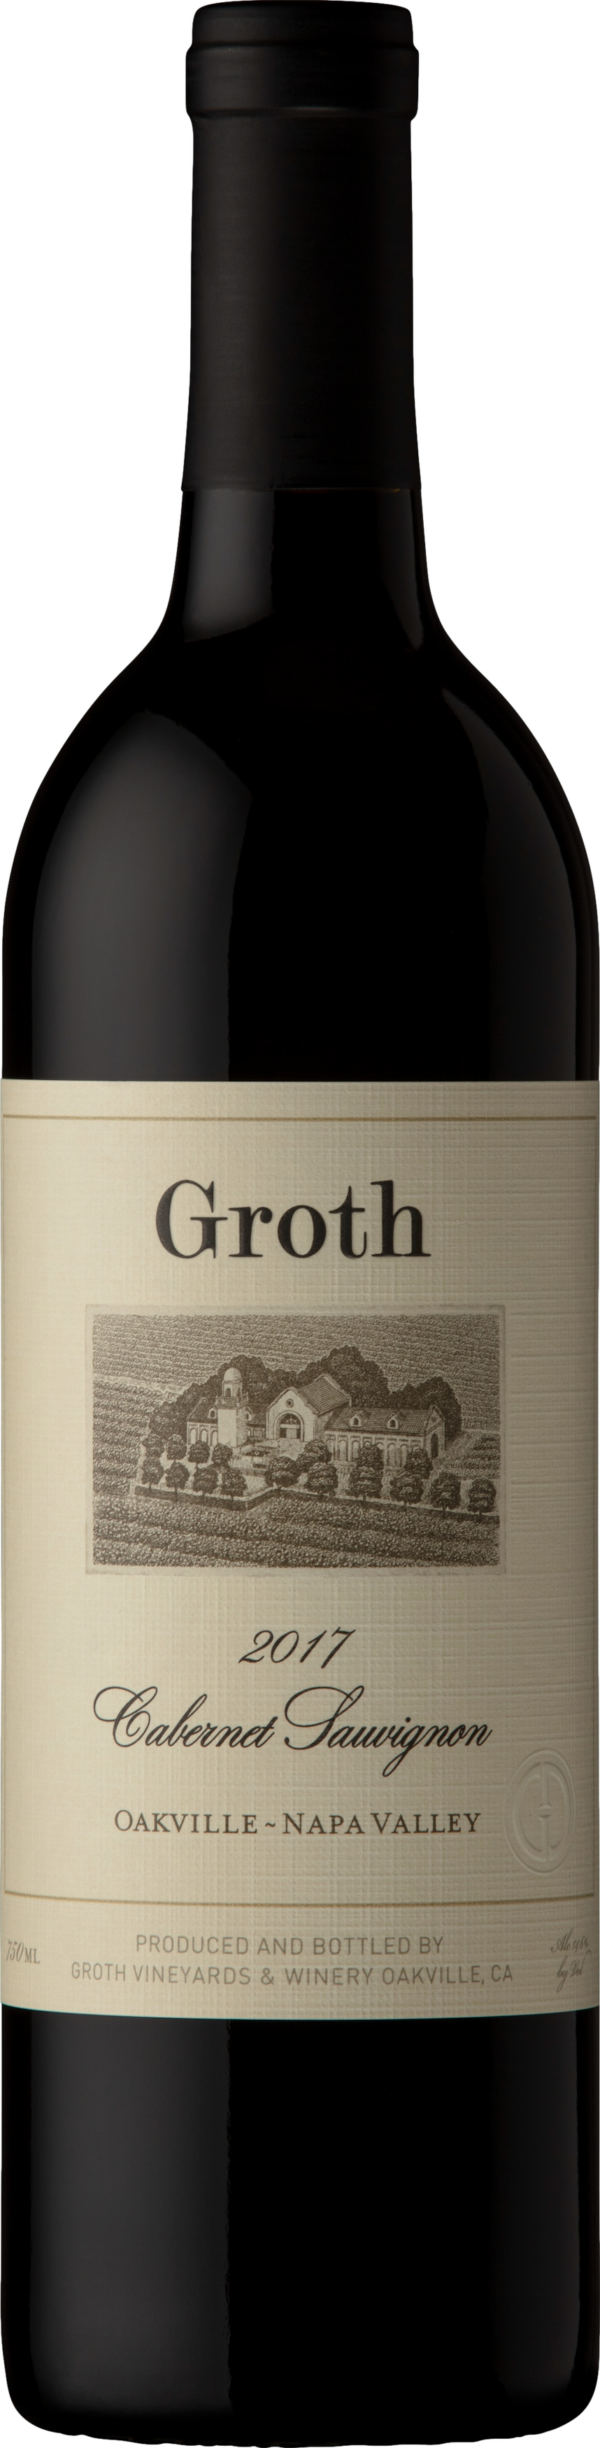 Product image of Groth Cabernet Sauvignon 2020 from 8wines